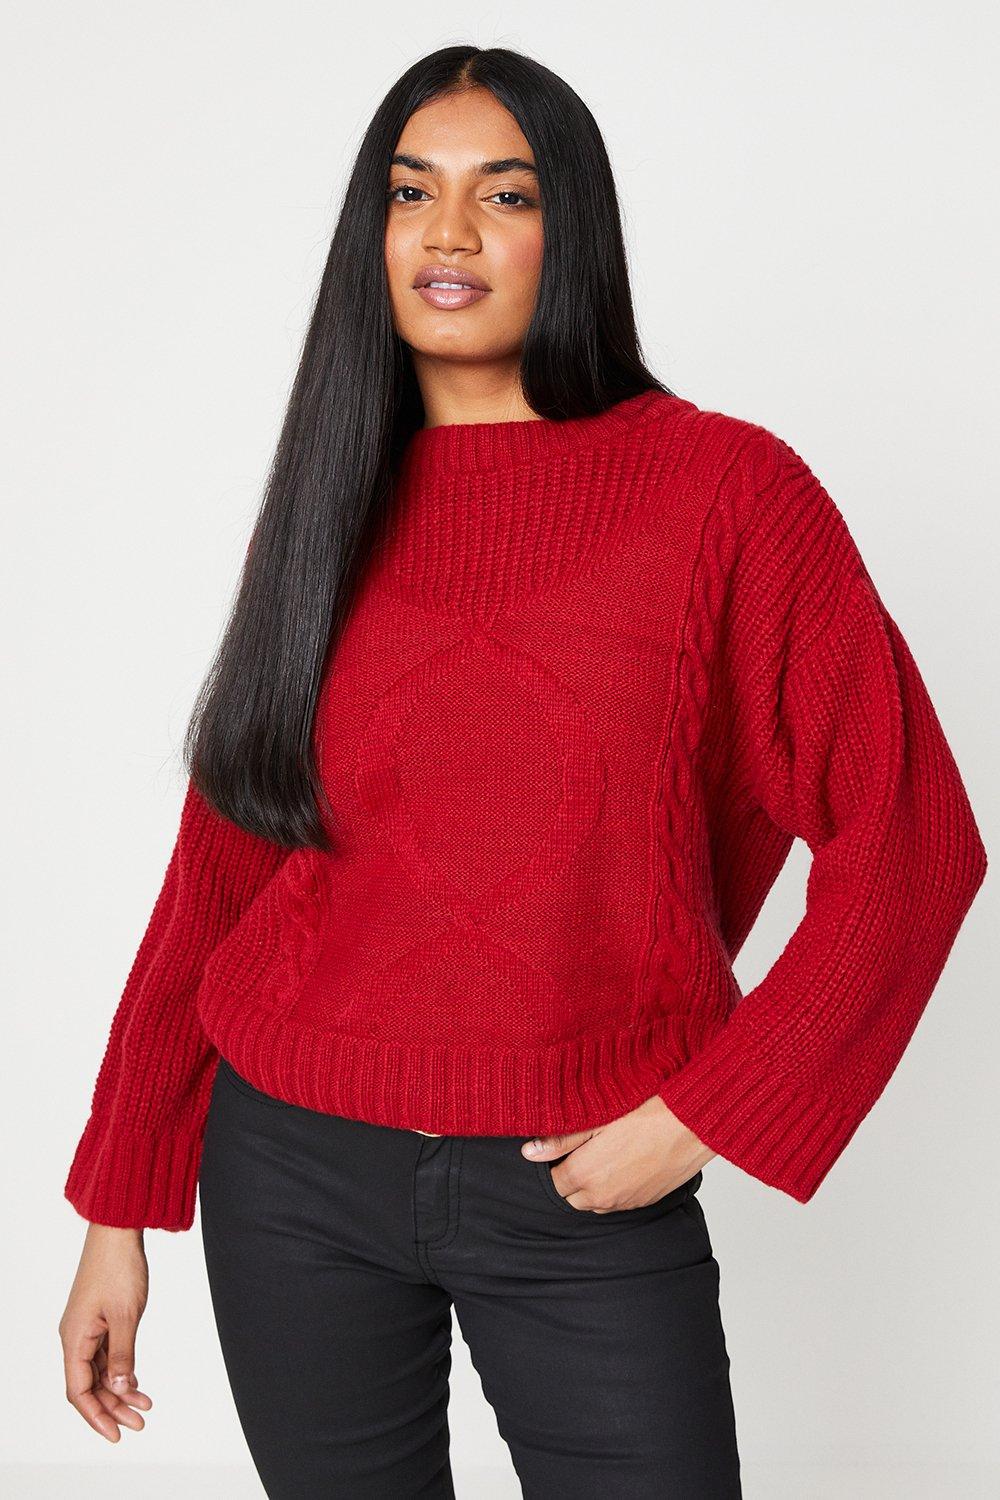 Women’s Petite Wide Sleeve Cable Fluffy Knit Jumper - red - XL